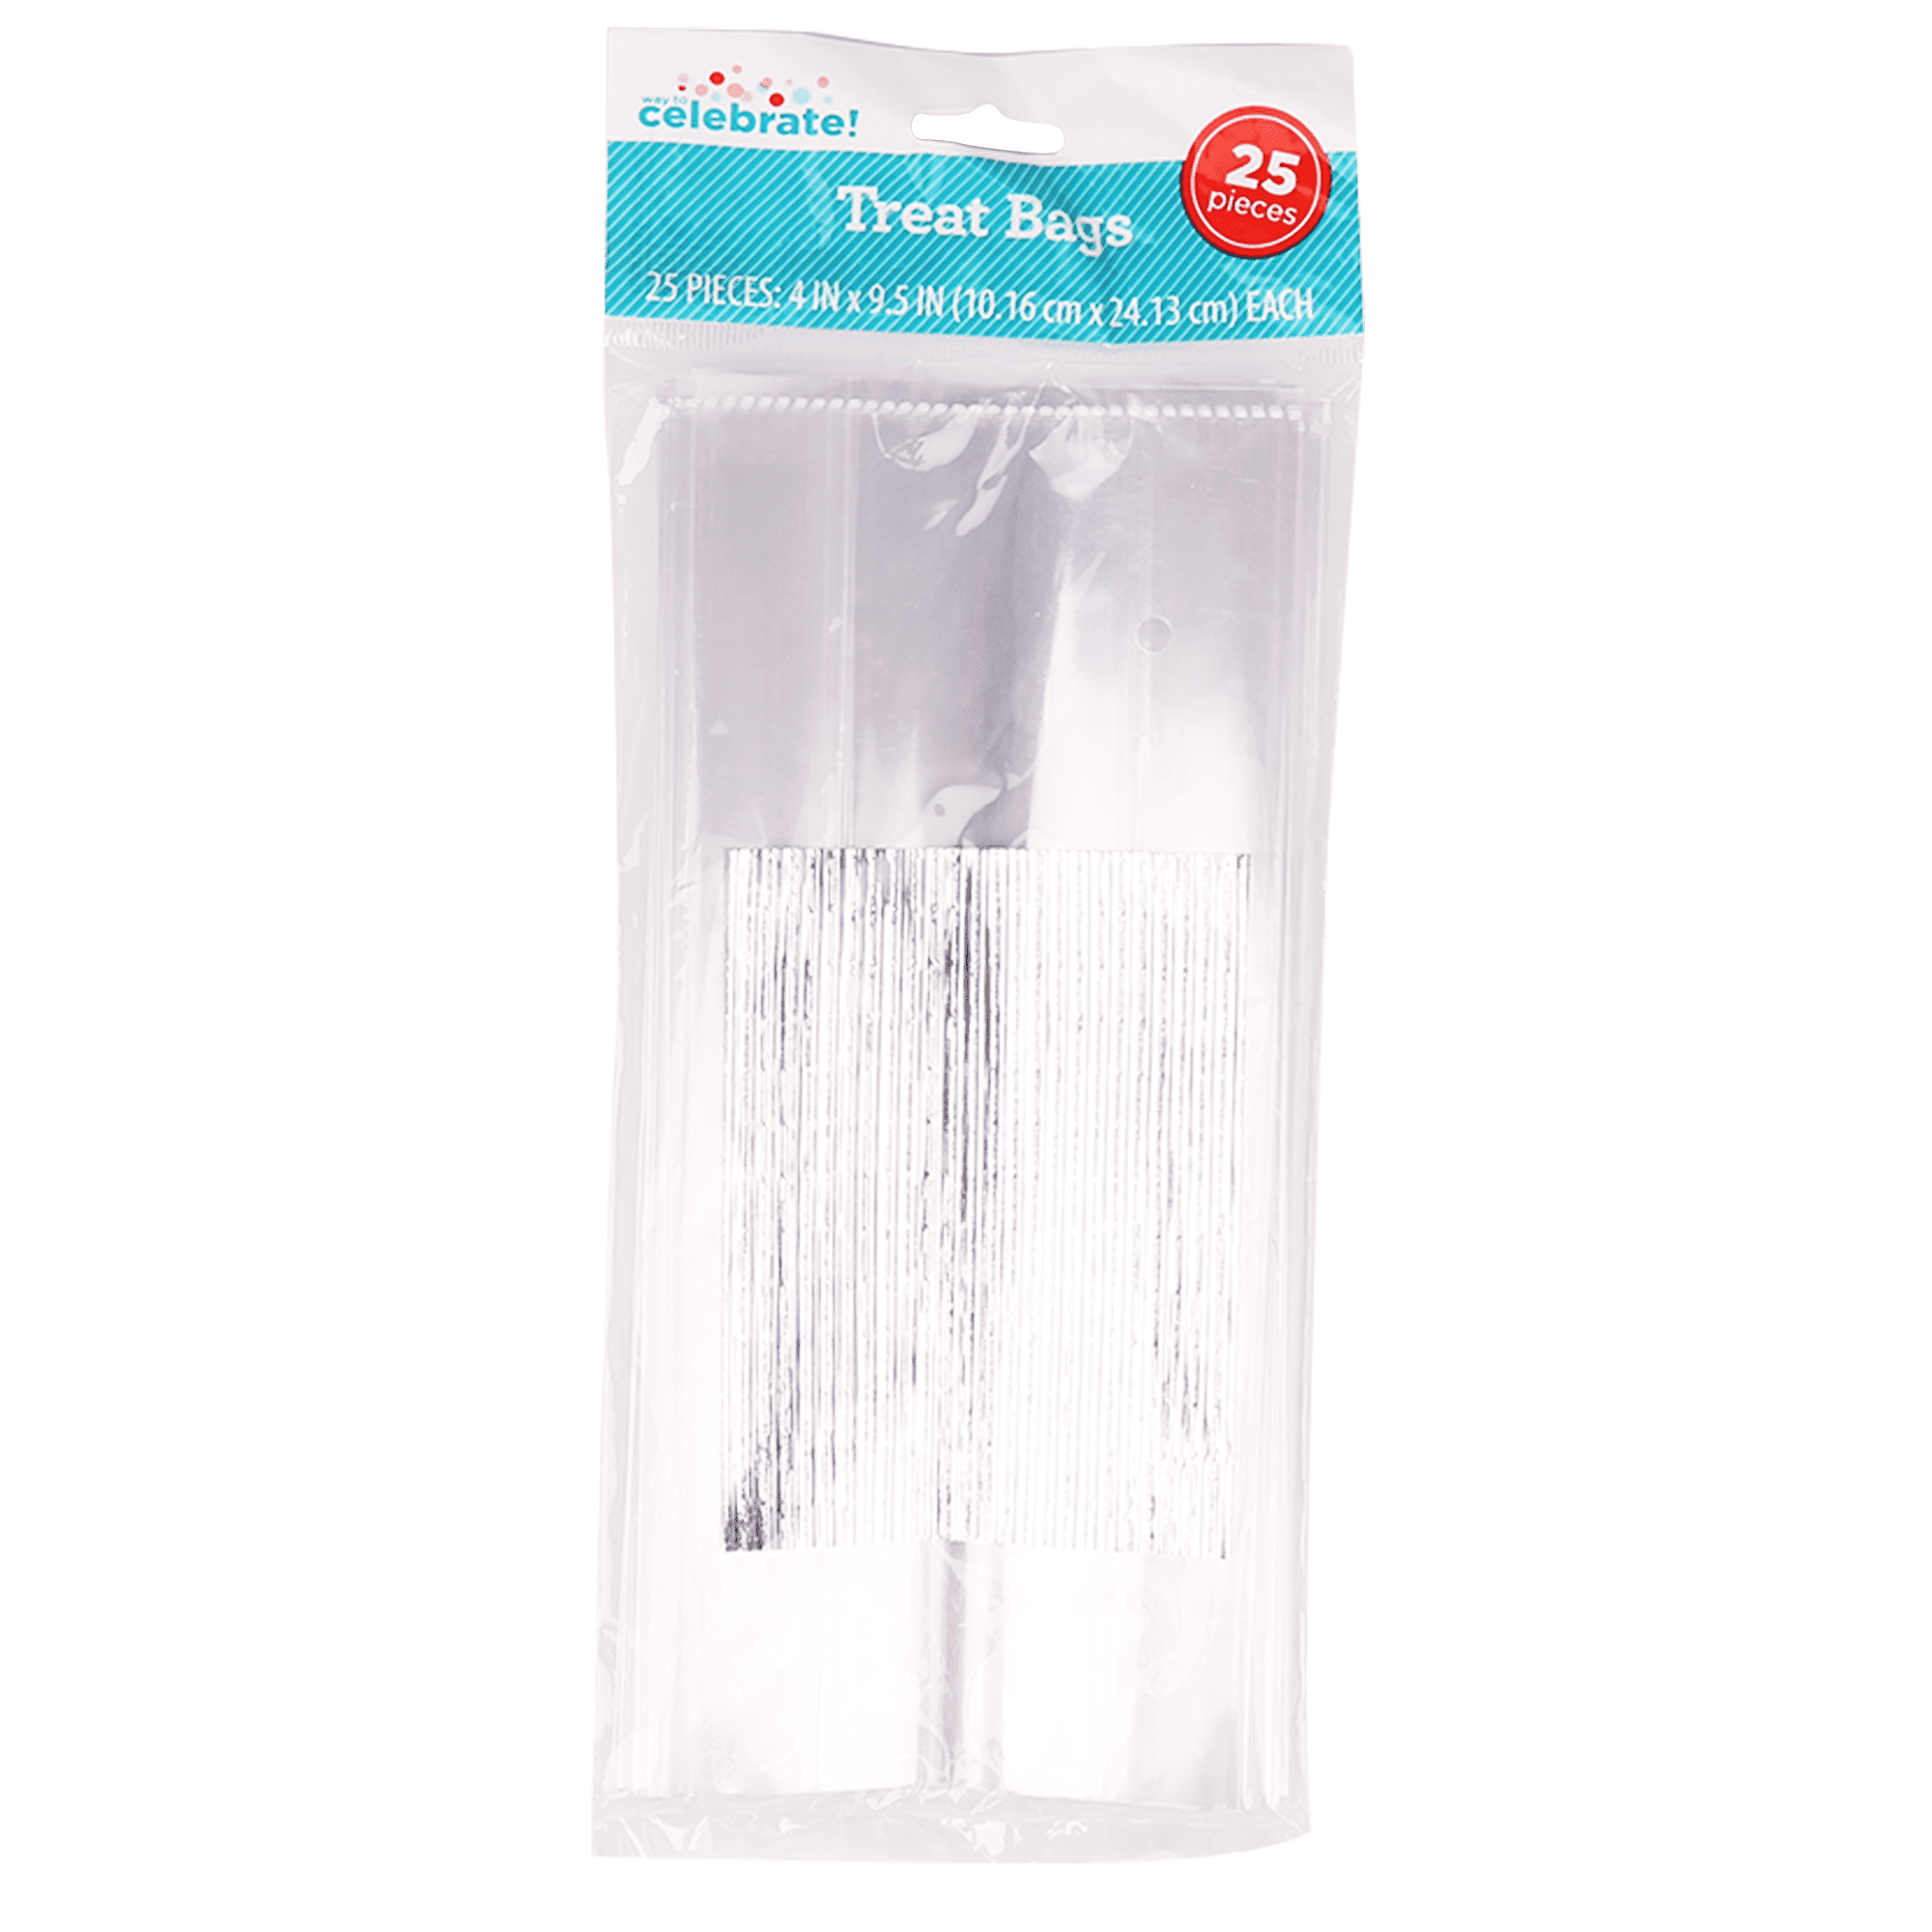 QTOP Cellophane Treat Bags,Iridescent Holographic Goodie Bags, Clear Cello  Bags with Twist Ties for Birthday Party Favors, Valentines, Easter